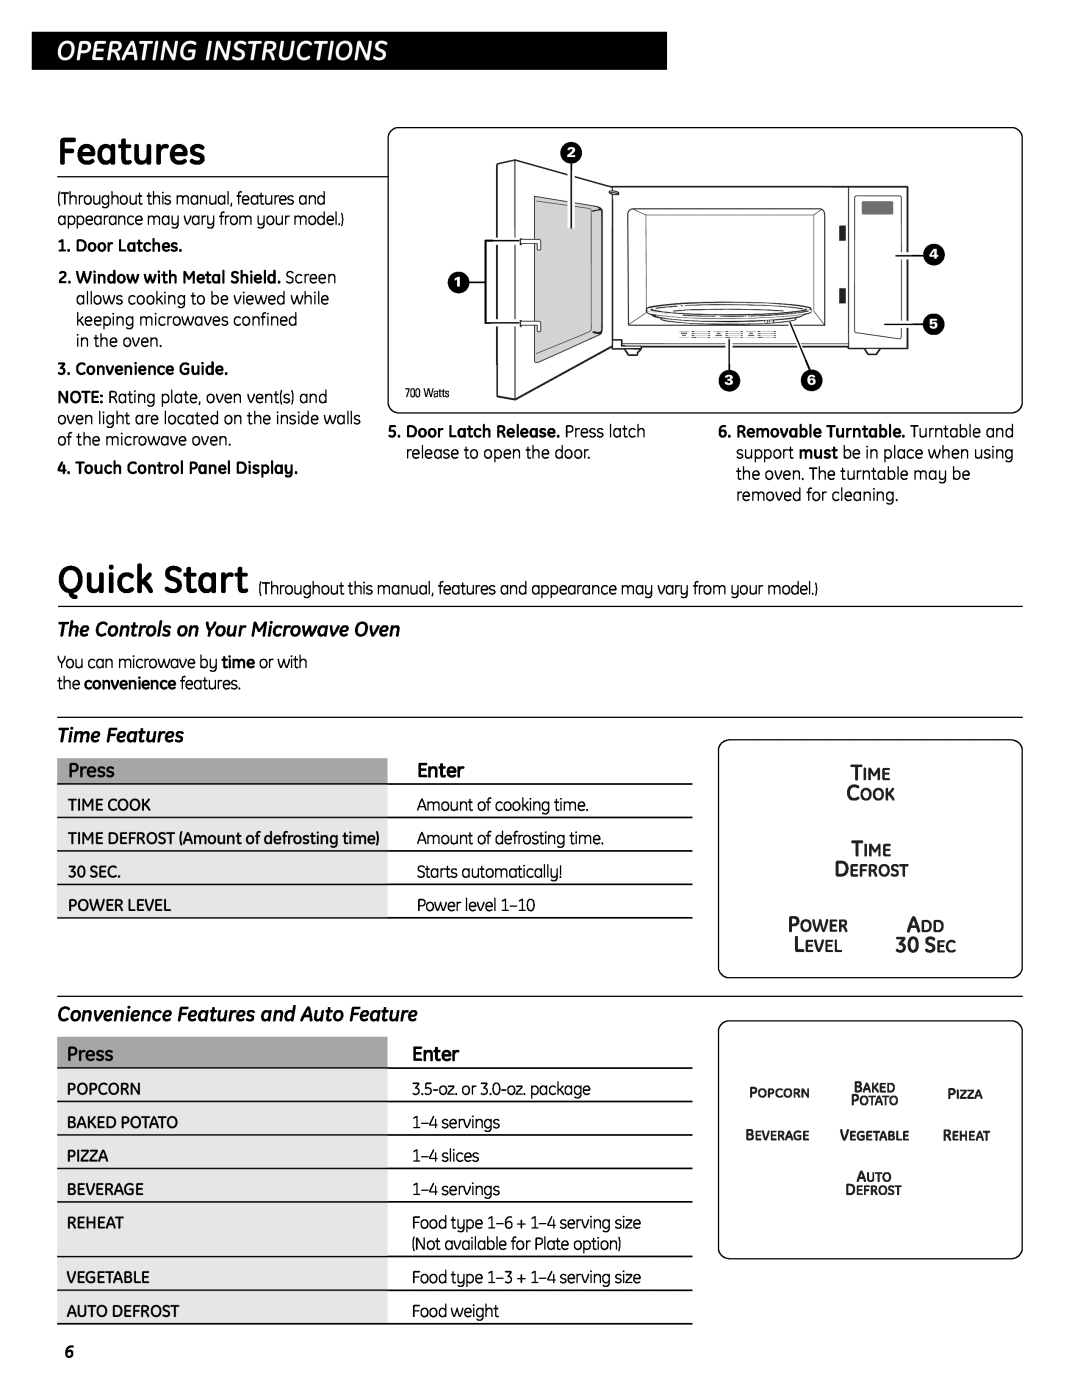 GE SESO732 Operating Instructions, The Controls on Your Microwave Oven, Time Features, Enter, Press, Door Latches 